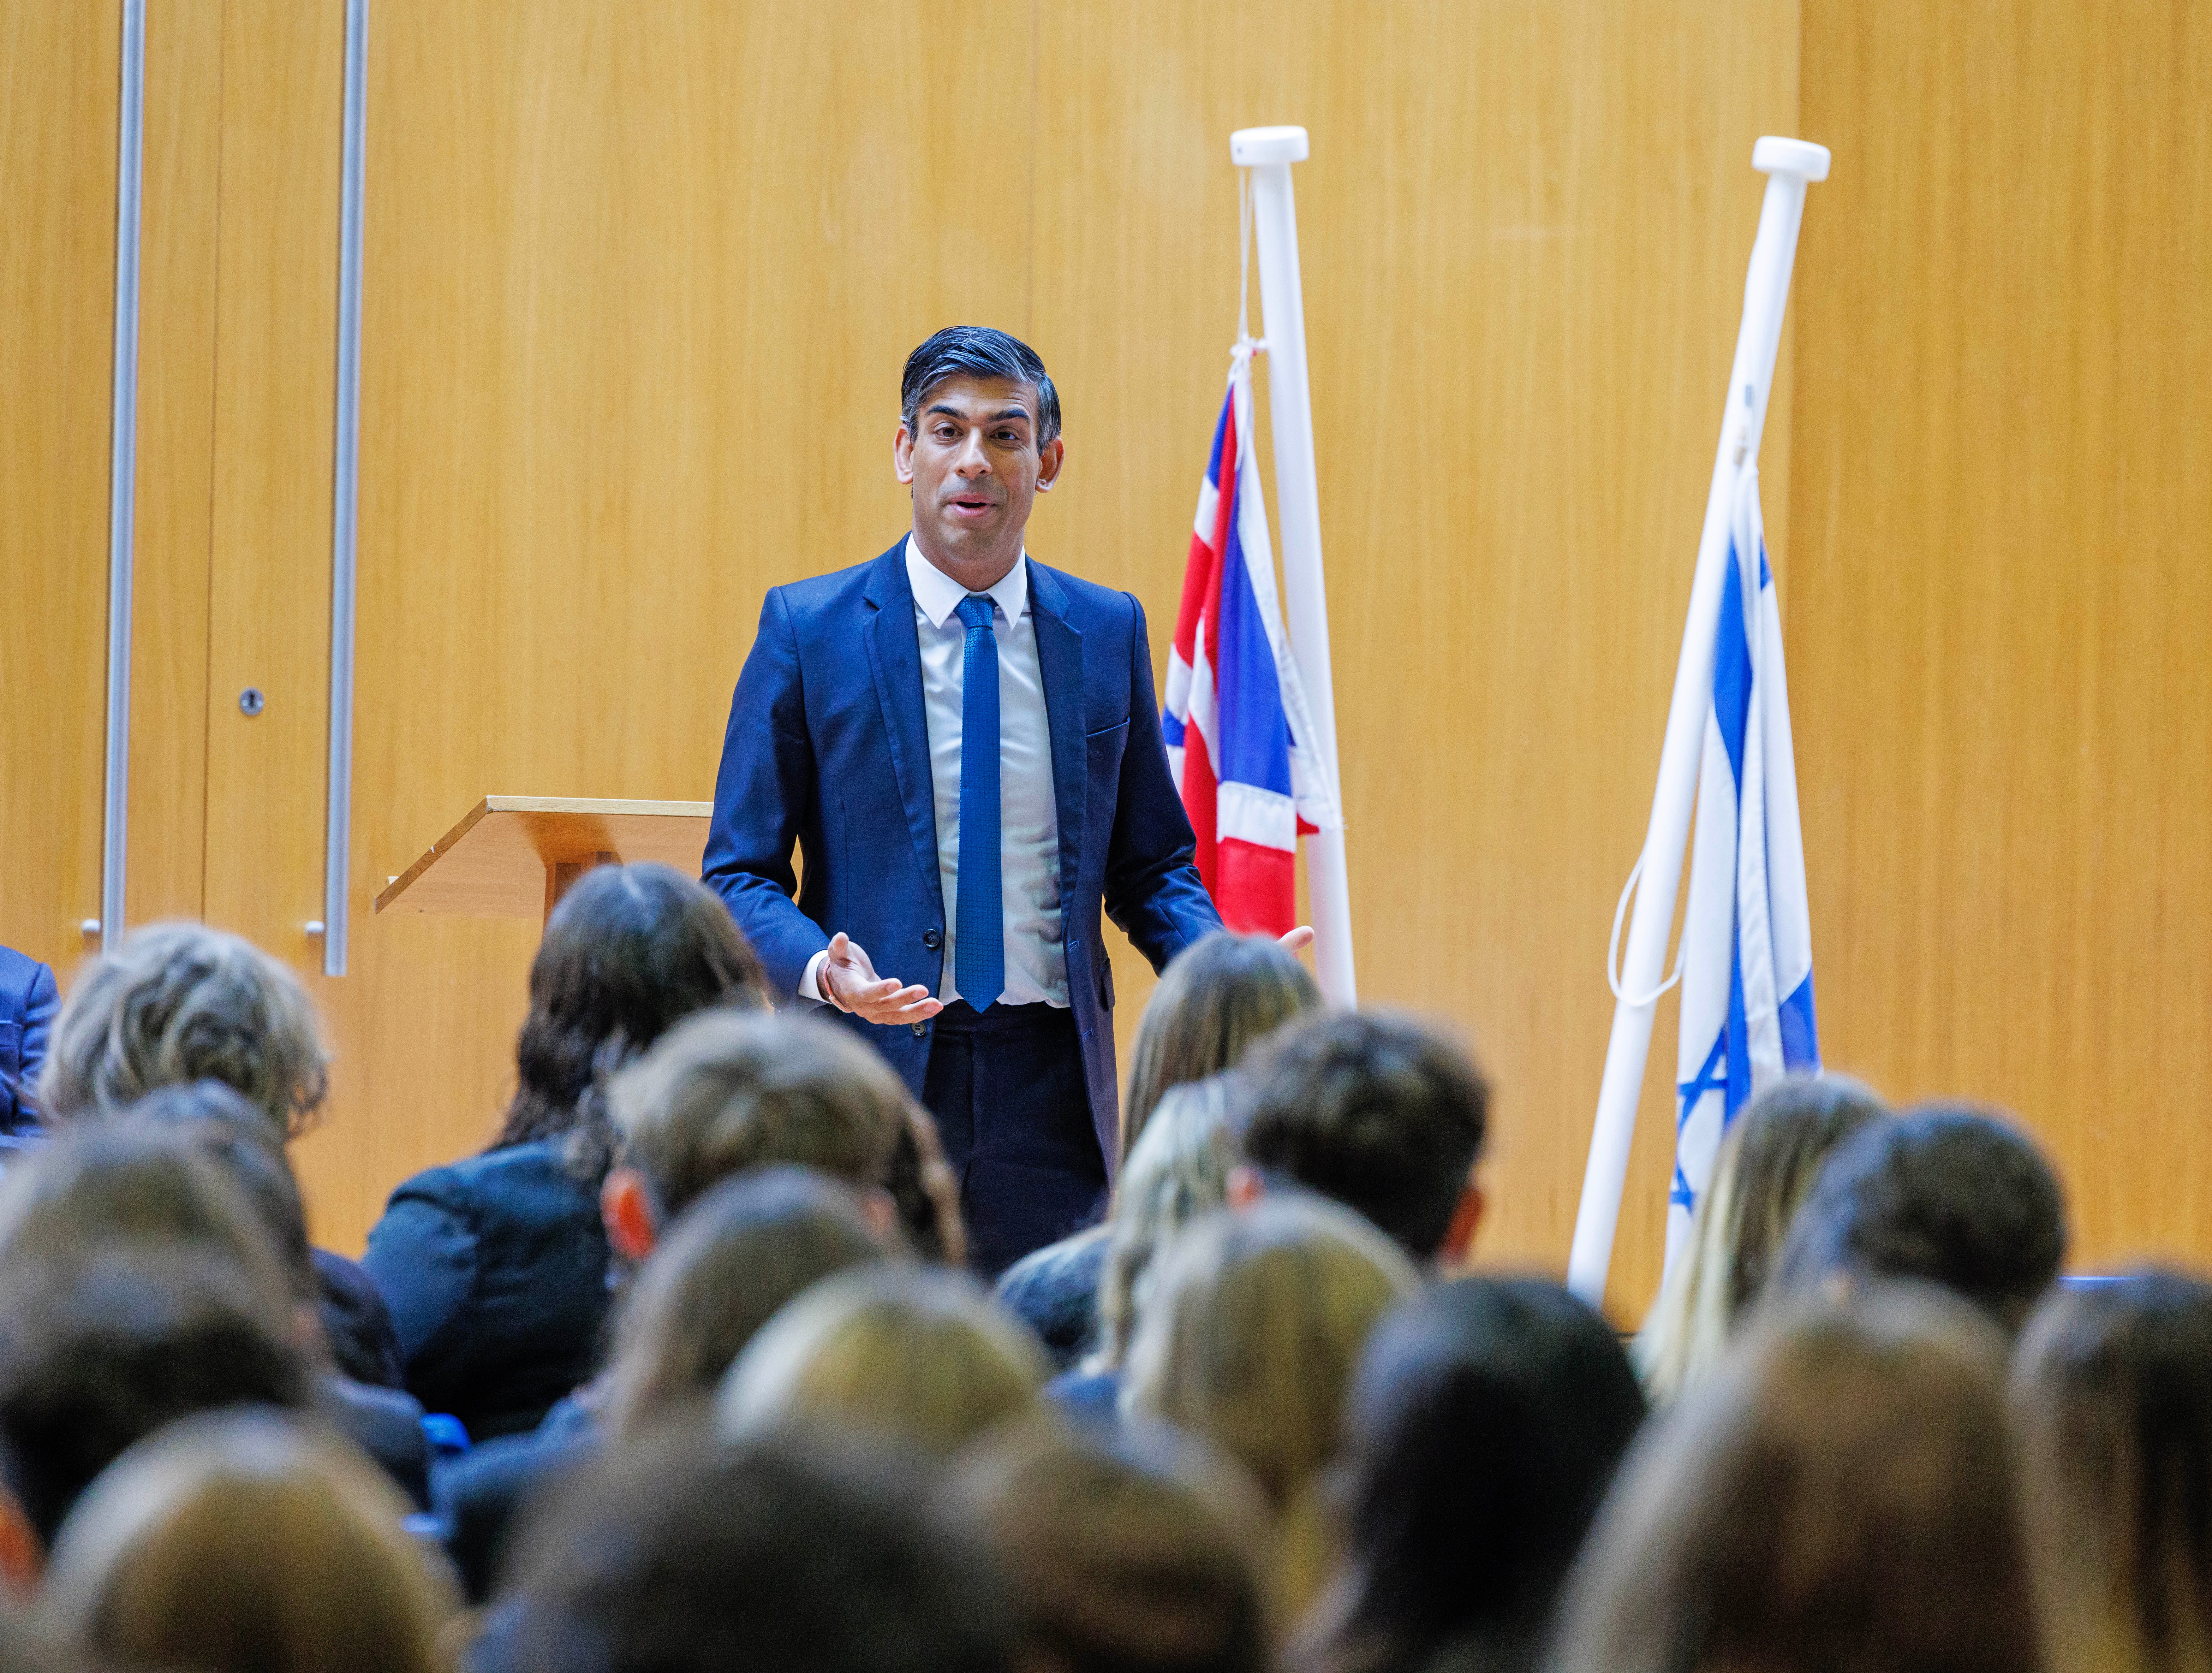 Rishi Sunak addresses students during an assembly at a Jewish school in north London on Monday